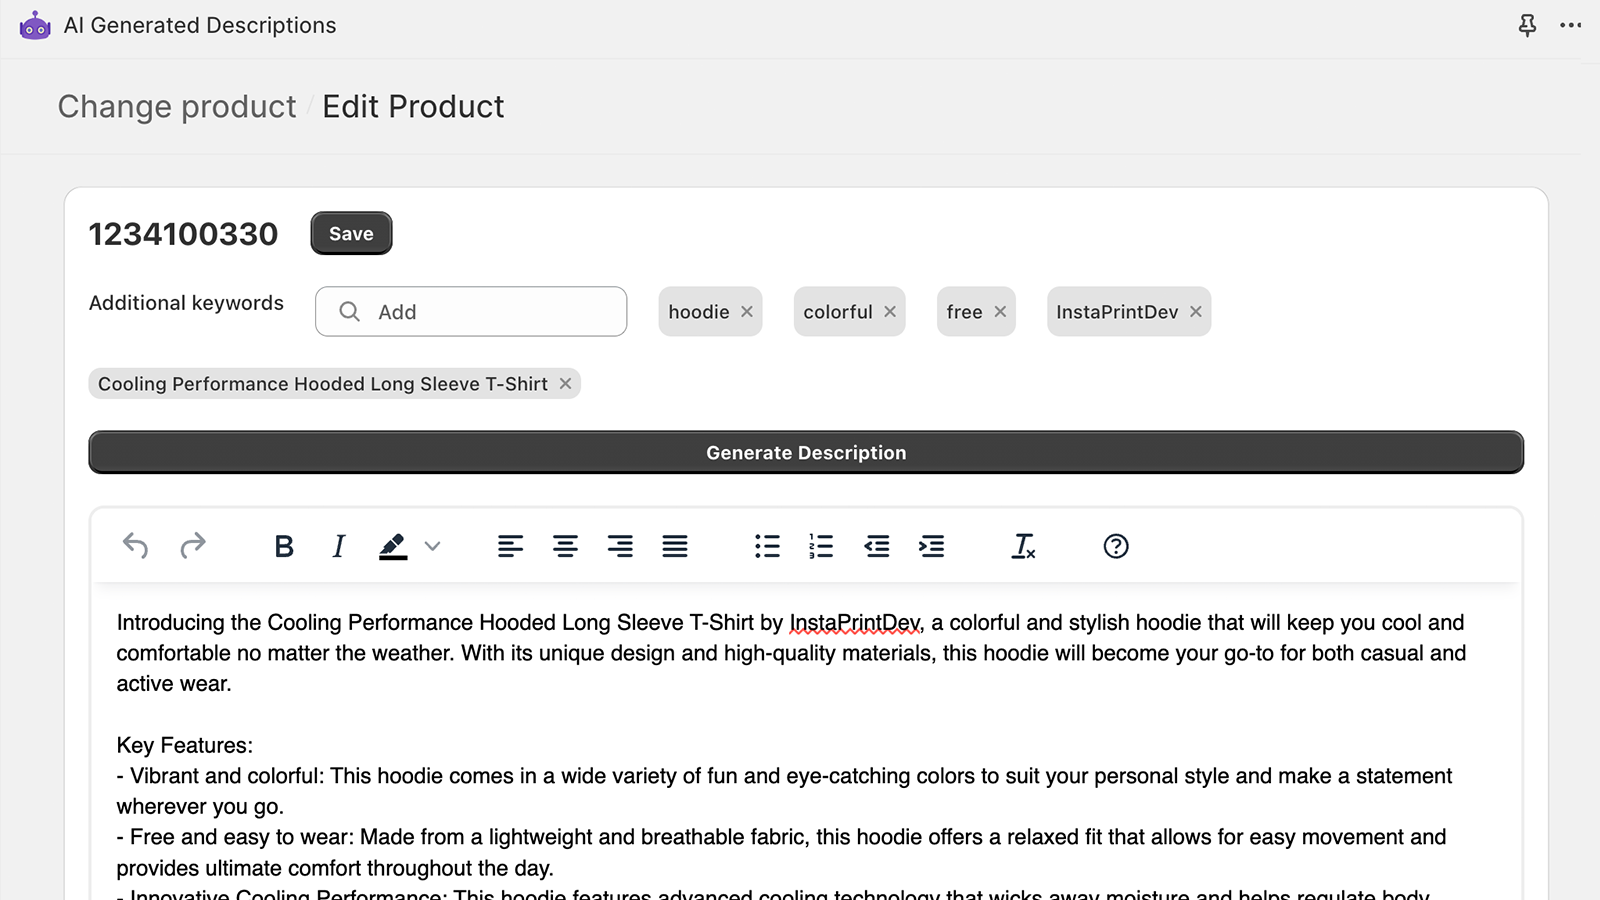 Product generation page with rich HTML editor